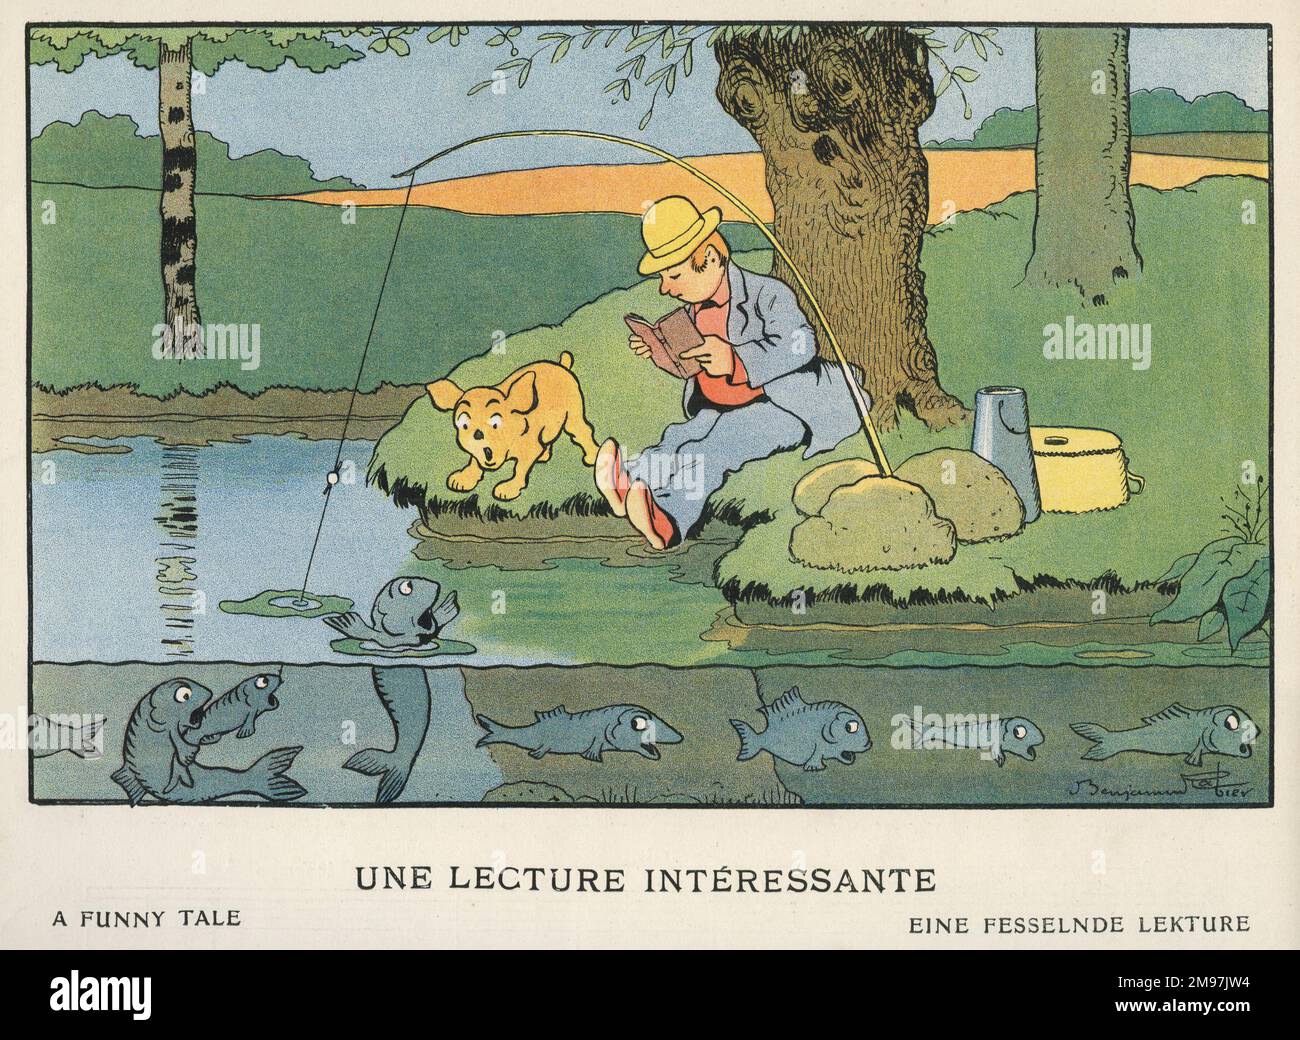 A man fishing reads an interesting story from his book, while his dog barks at a fish, illustration in Les Images en Musique, with illustrations by Benjamin Rabier and easy pieces for piano by Jane Vieu. Stock Photo